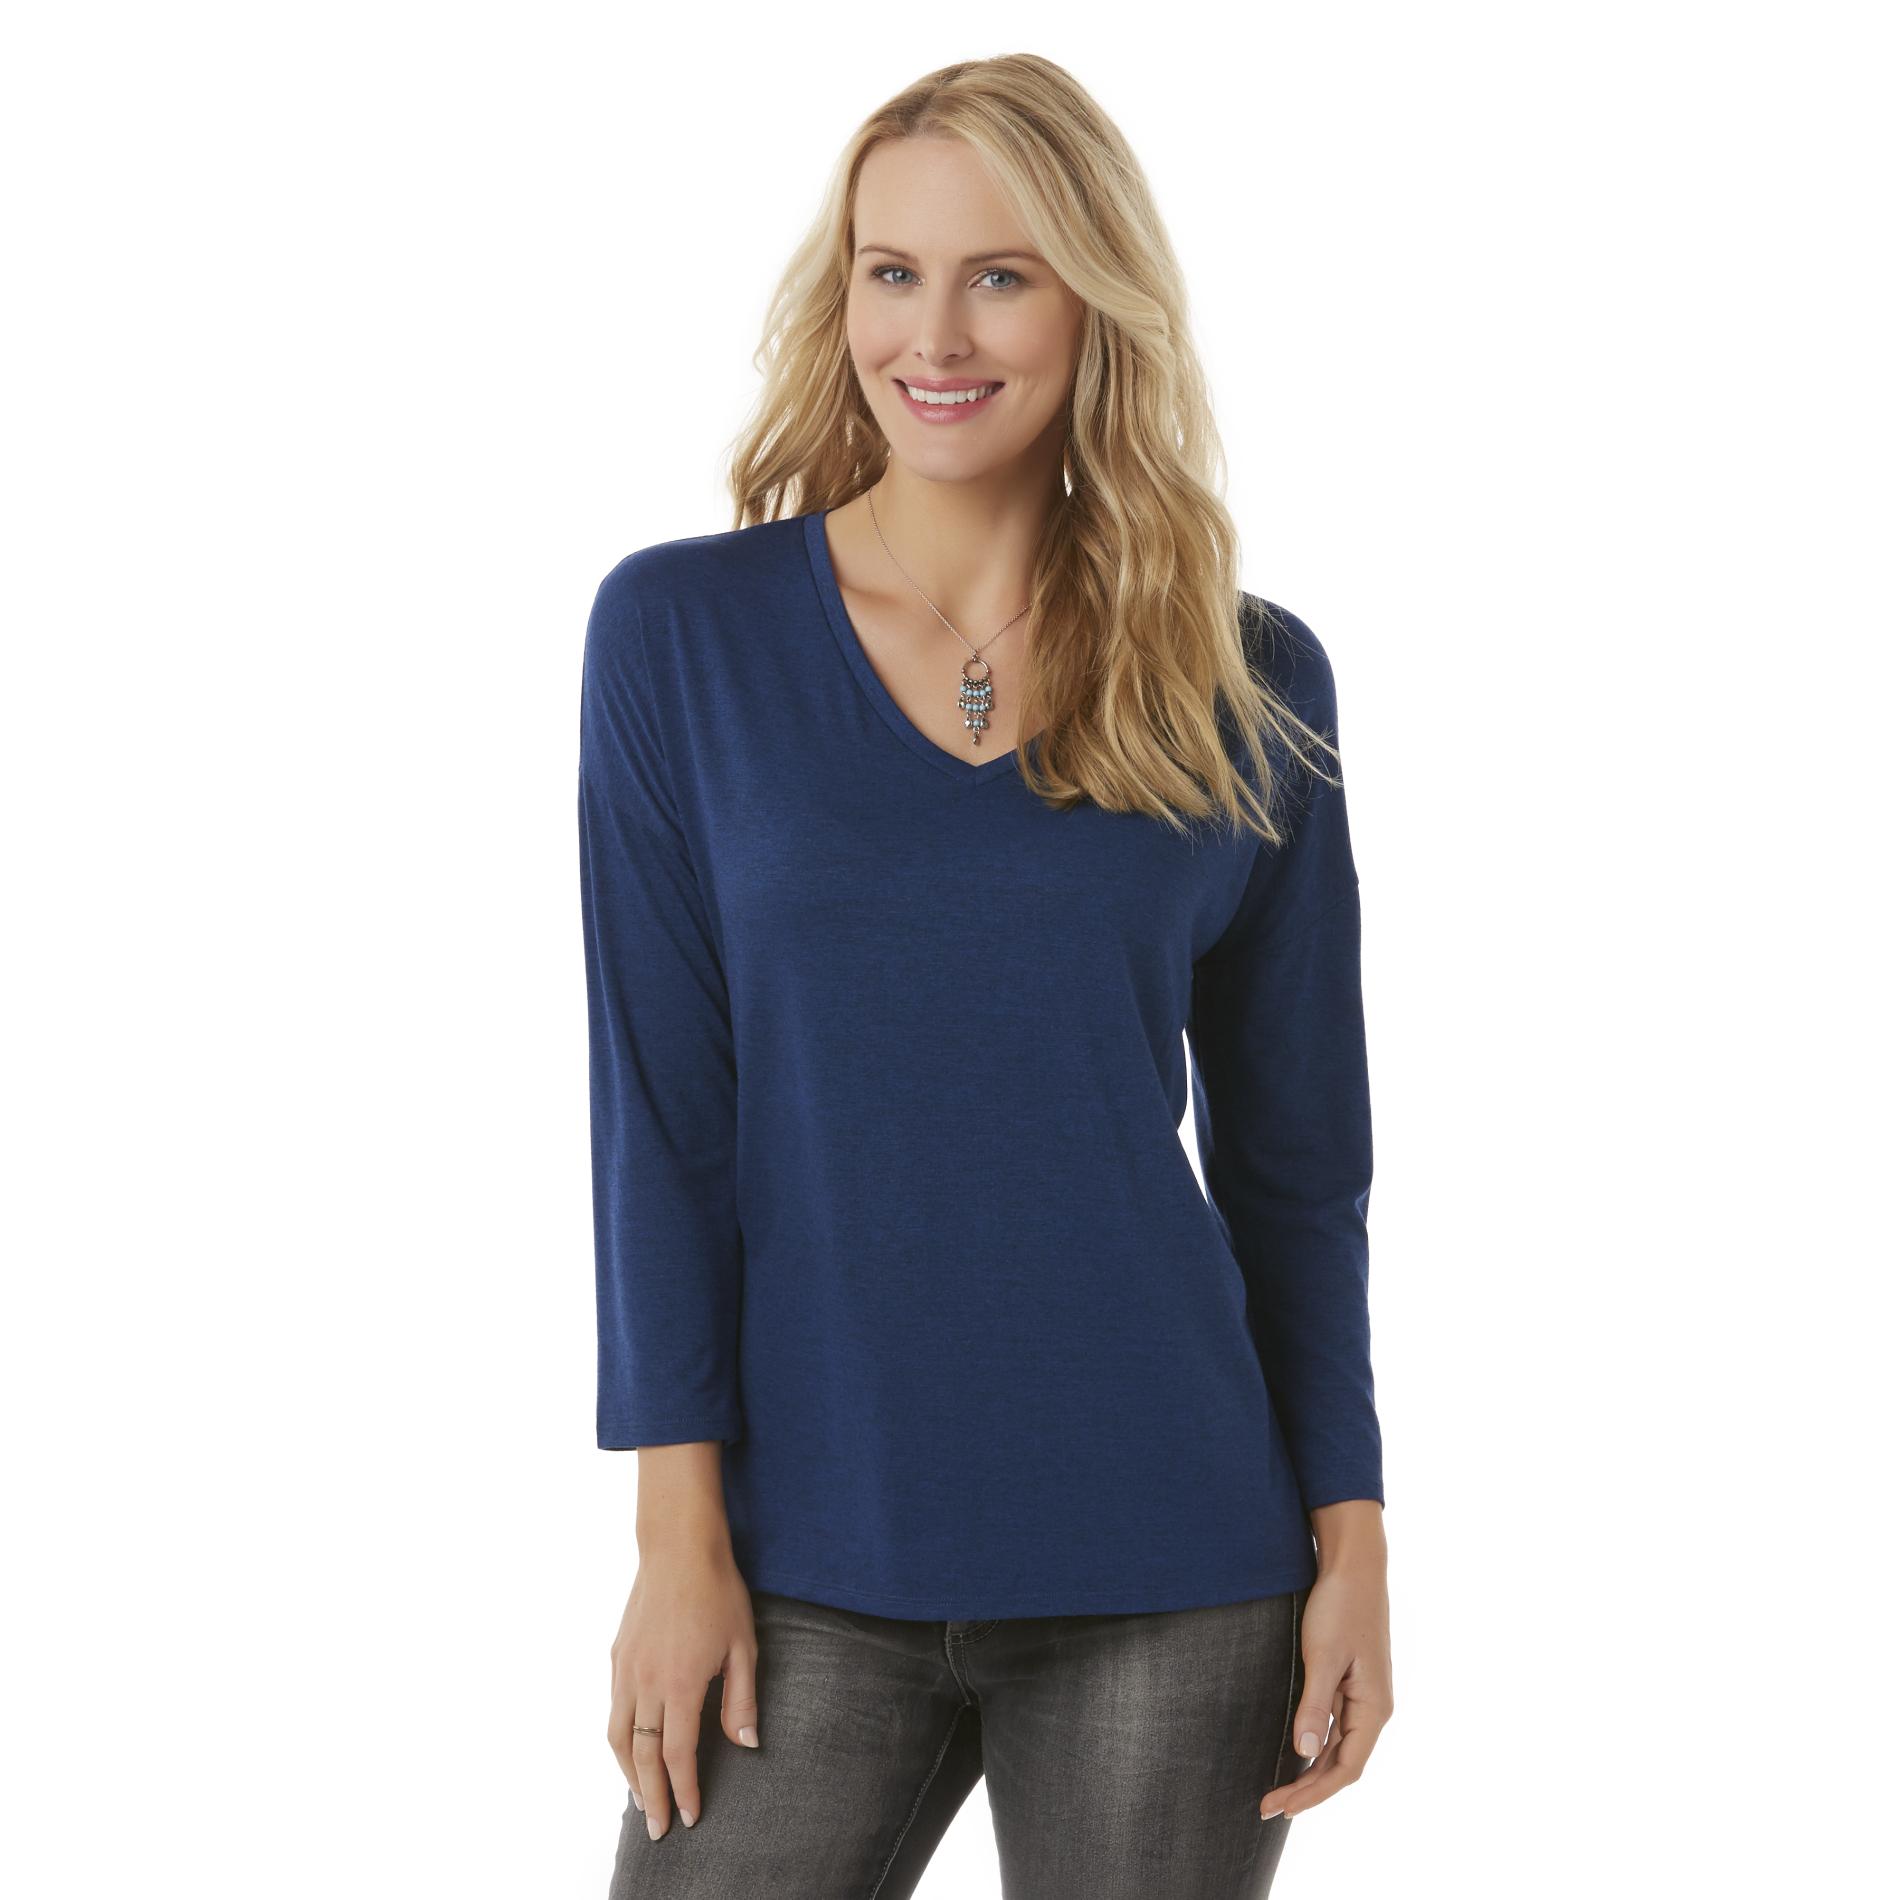 Simply Styled Women's V-Neck Top - Heathered